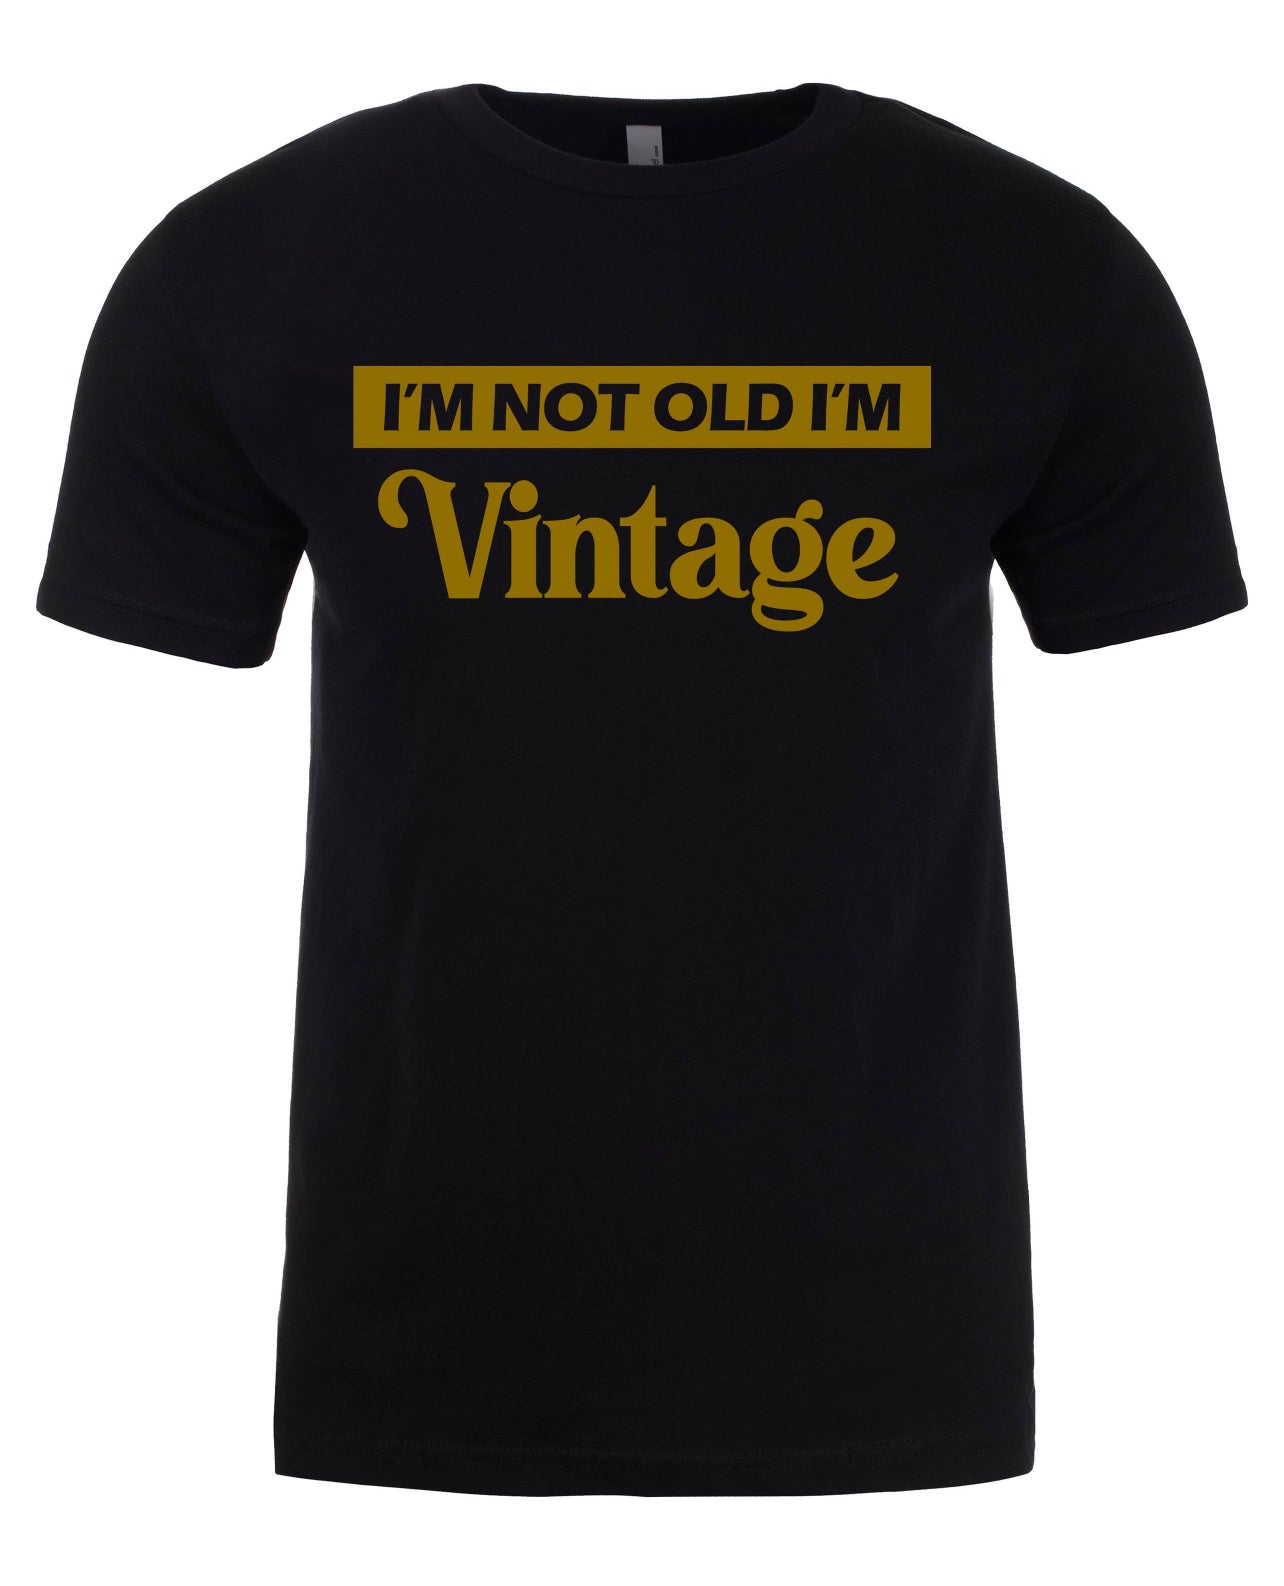 I’m not old I’m Vintage - Graphic Tee